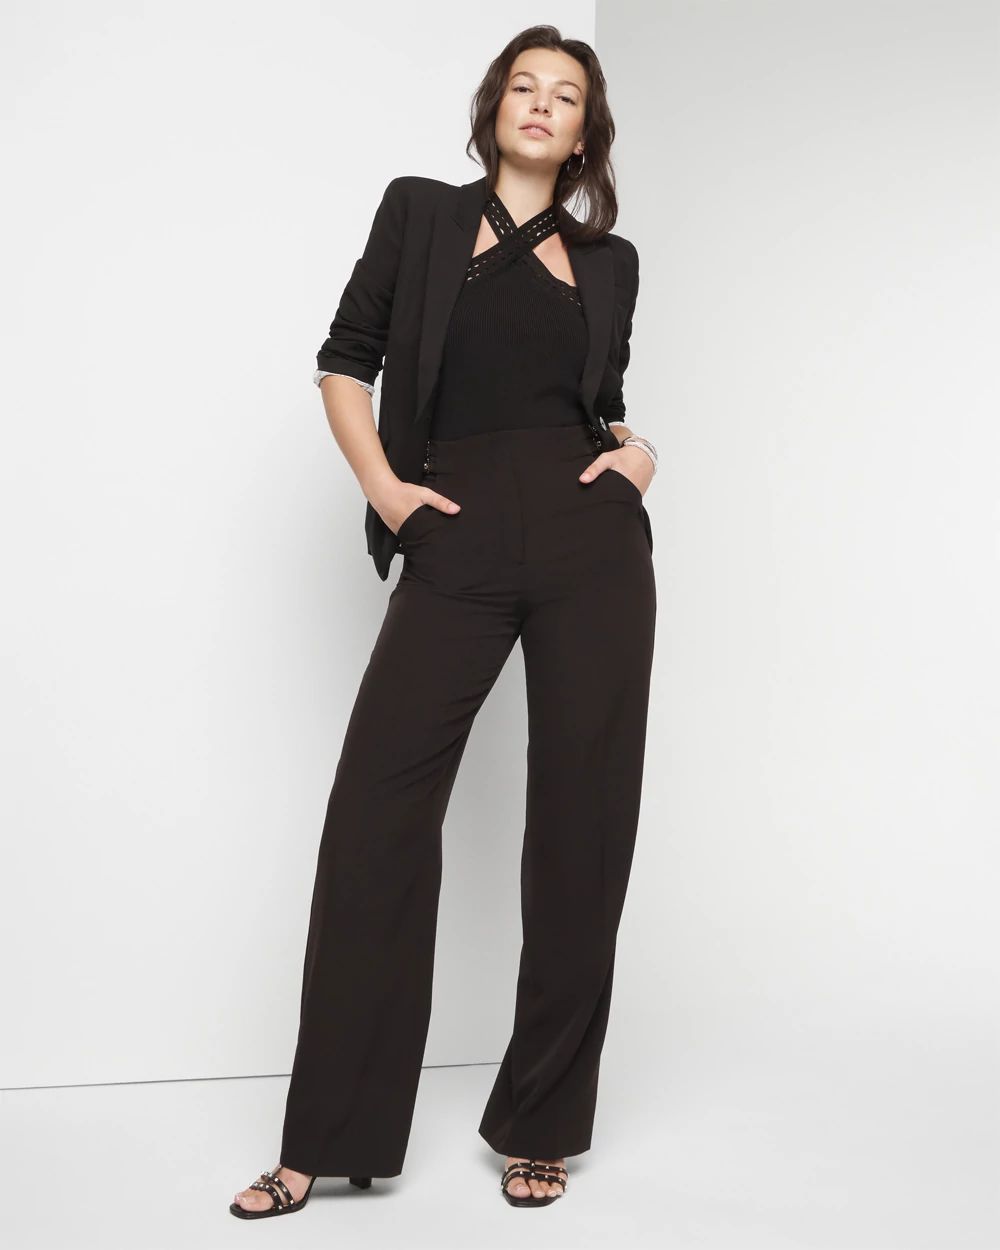 Buckle-Waist Wide-Leg Pant click to view larger image.